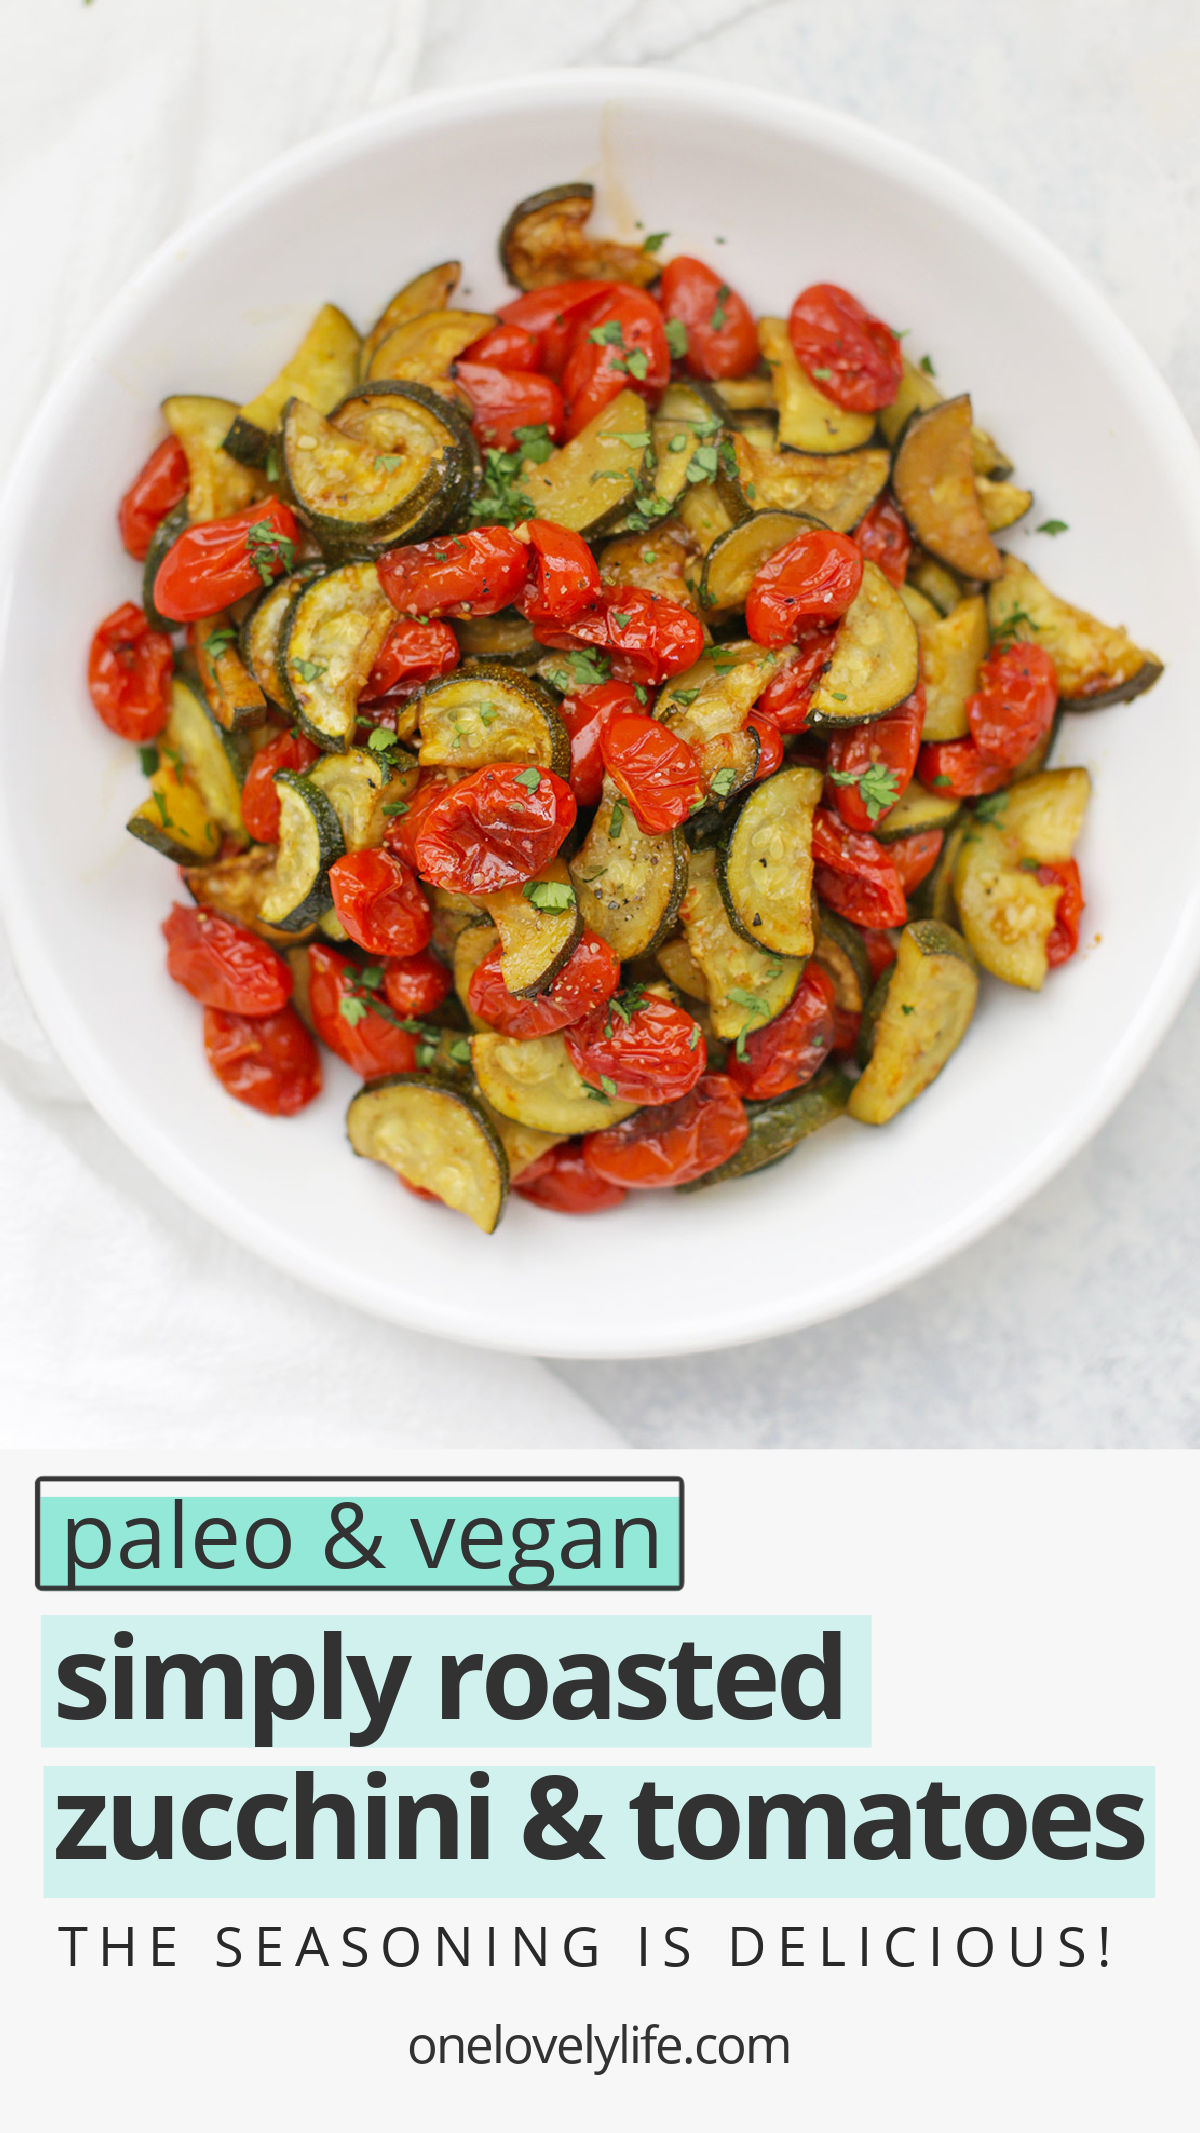 Simply Roasted Zucchini and Tomatoes. The perfect vegetable side dish! Gluten free, dairy free, paleo, whole30, and vegan! // zucchini recipe // tomato recipe // roasted zucchini // roasted tomatoes // roasted veggies // roasted vegetables // #zucchini #tomatoes #summerrecipe #sidedish #roastedvegetables #veggies #paleo #glutenfree #vegan #whole30